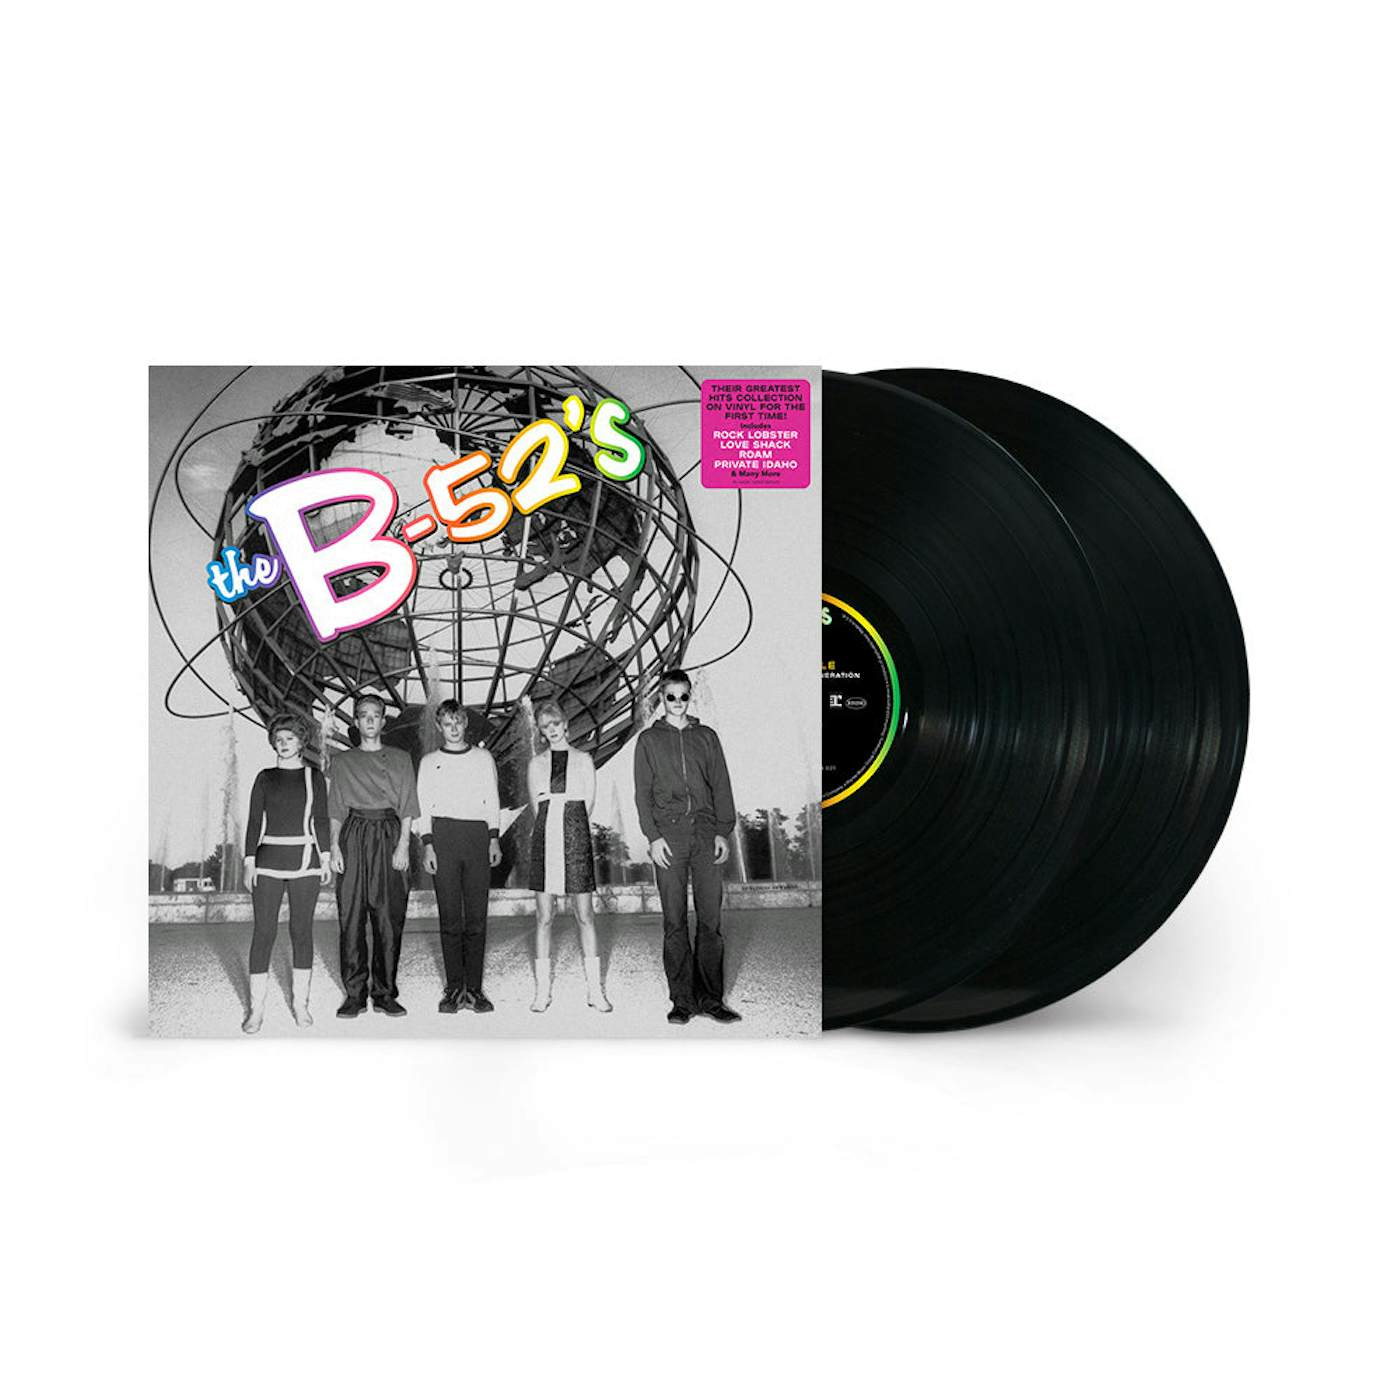 The B-52's Time Capsule: Songs For A Future Generation [2LP] (Vinyl)